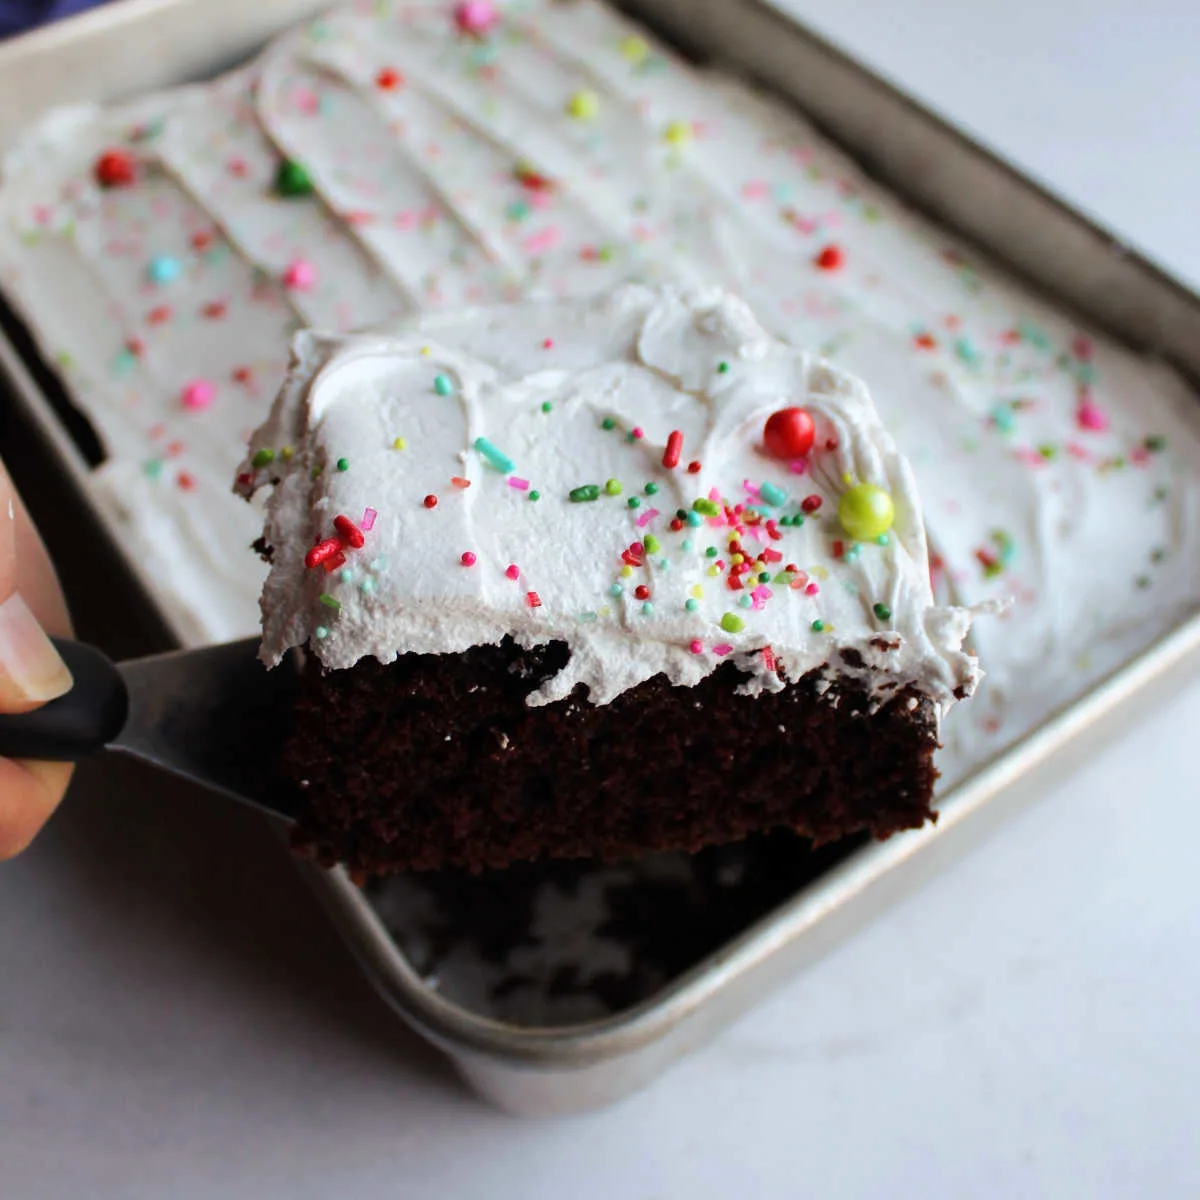 slice of devilishly good chocolate sheet cake with fluffy white seven minute frosting and sprinkles.